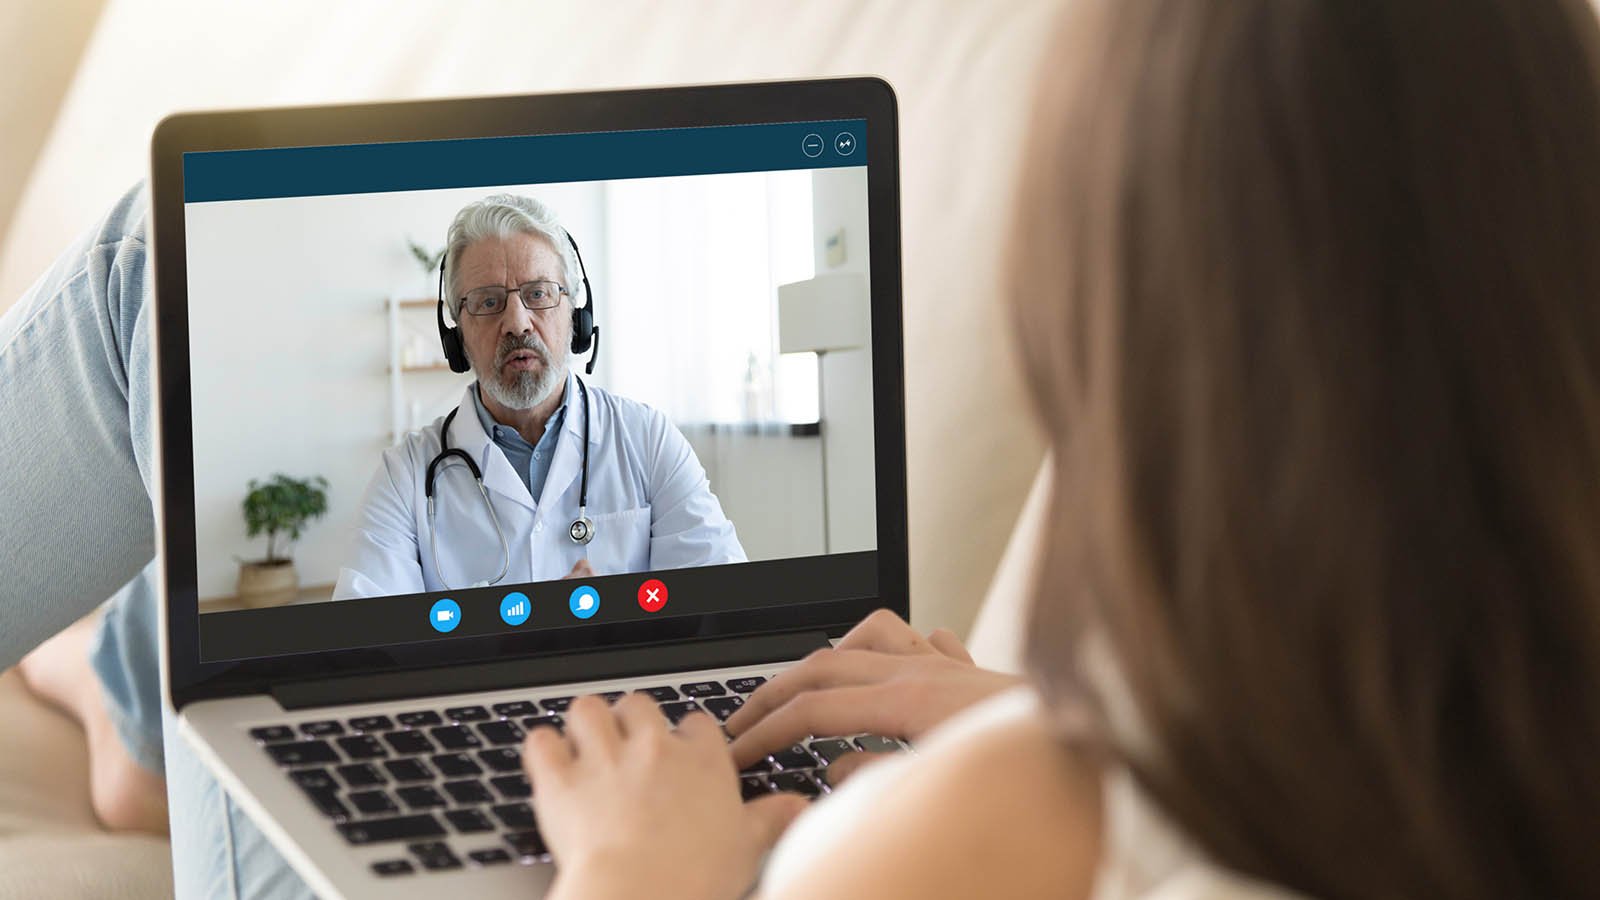 3 Stocks to Capitalize on the Telehealth Explosion